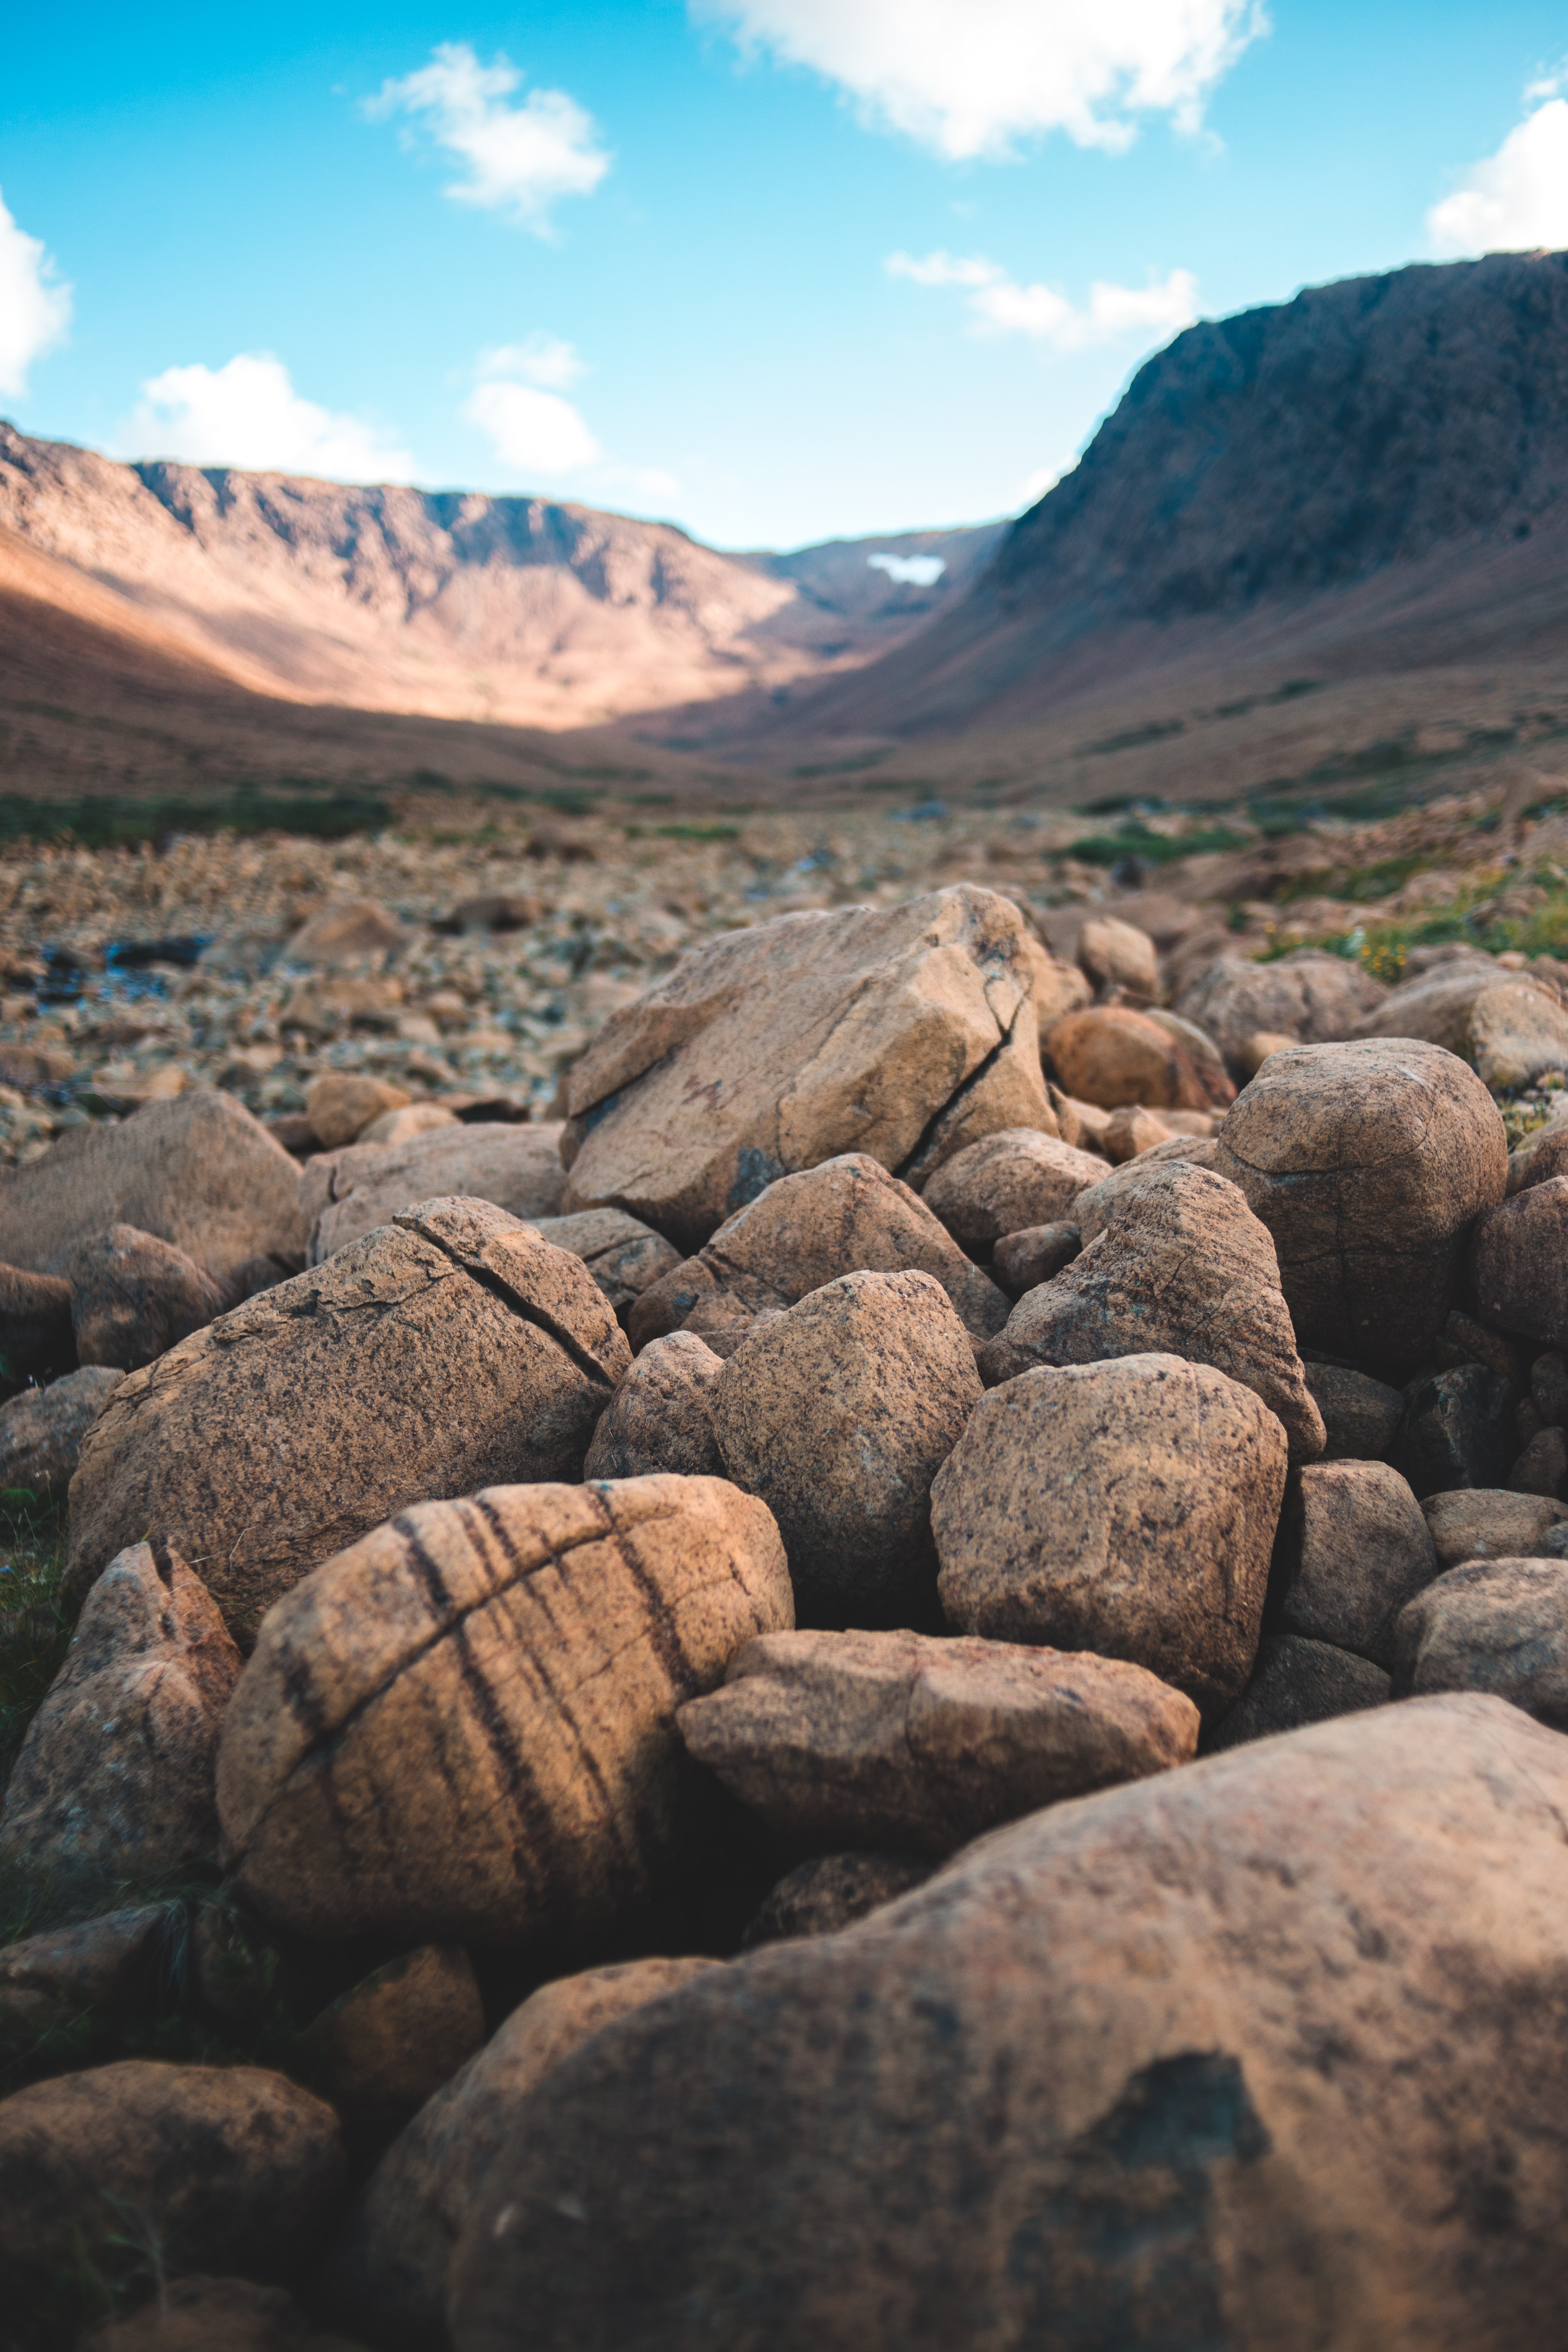 1080p pic sky, stones, nature, mountains